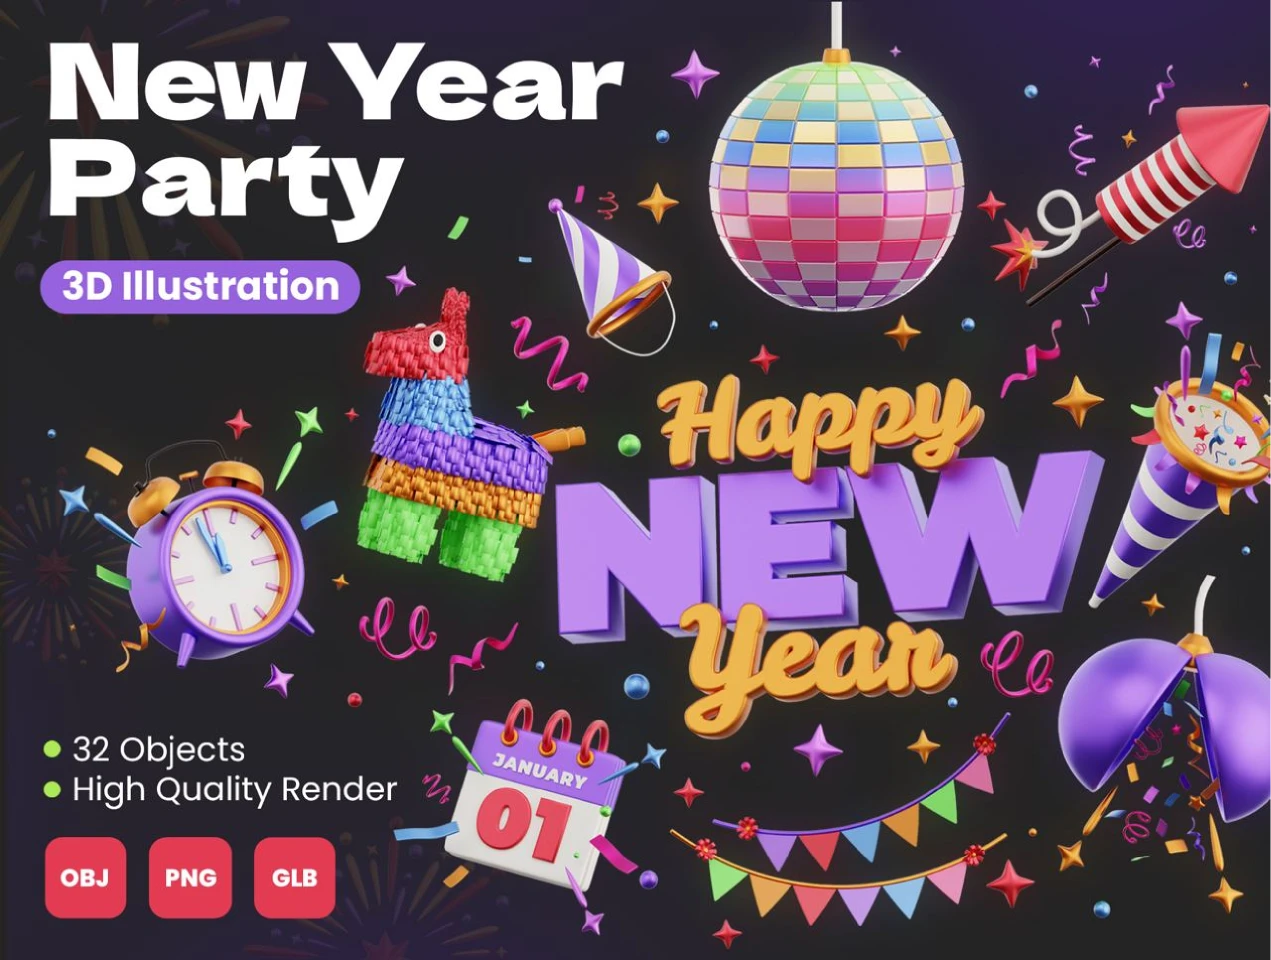 New Year party 3d illustration FREE for Figma and Adobe XD